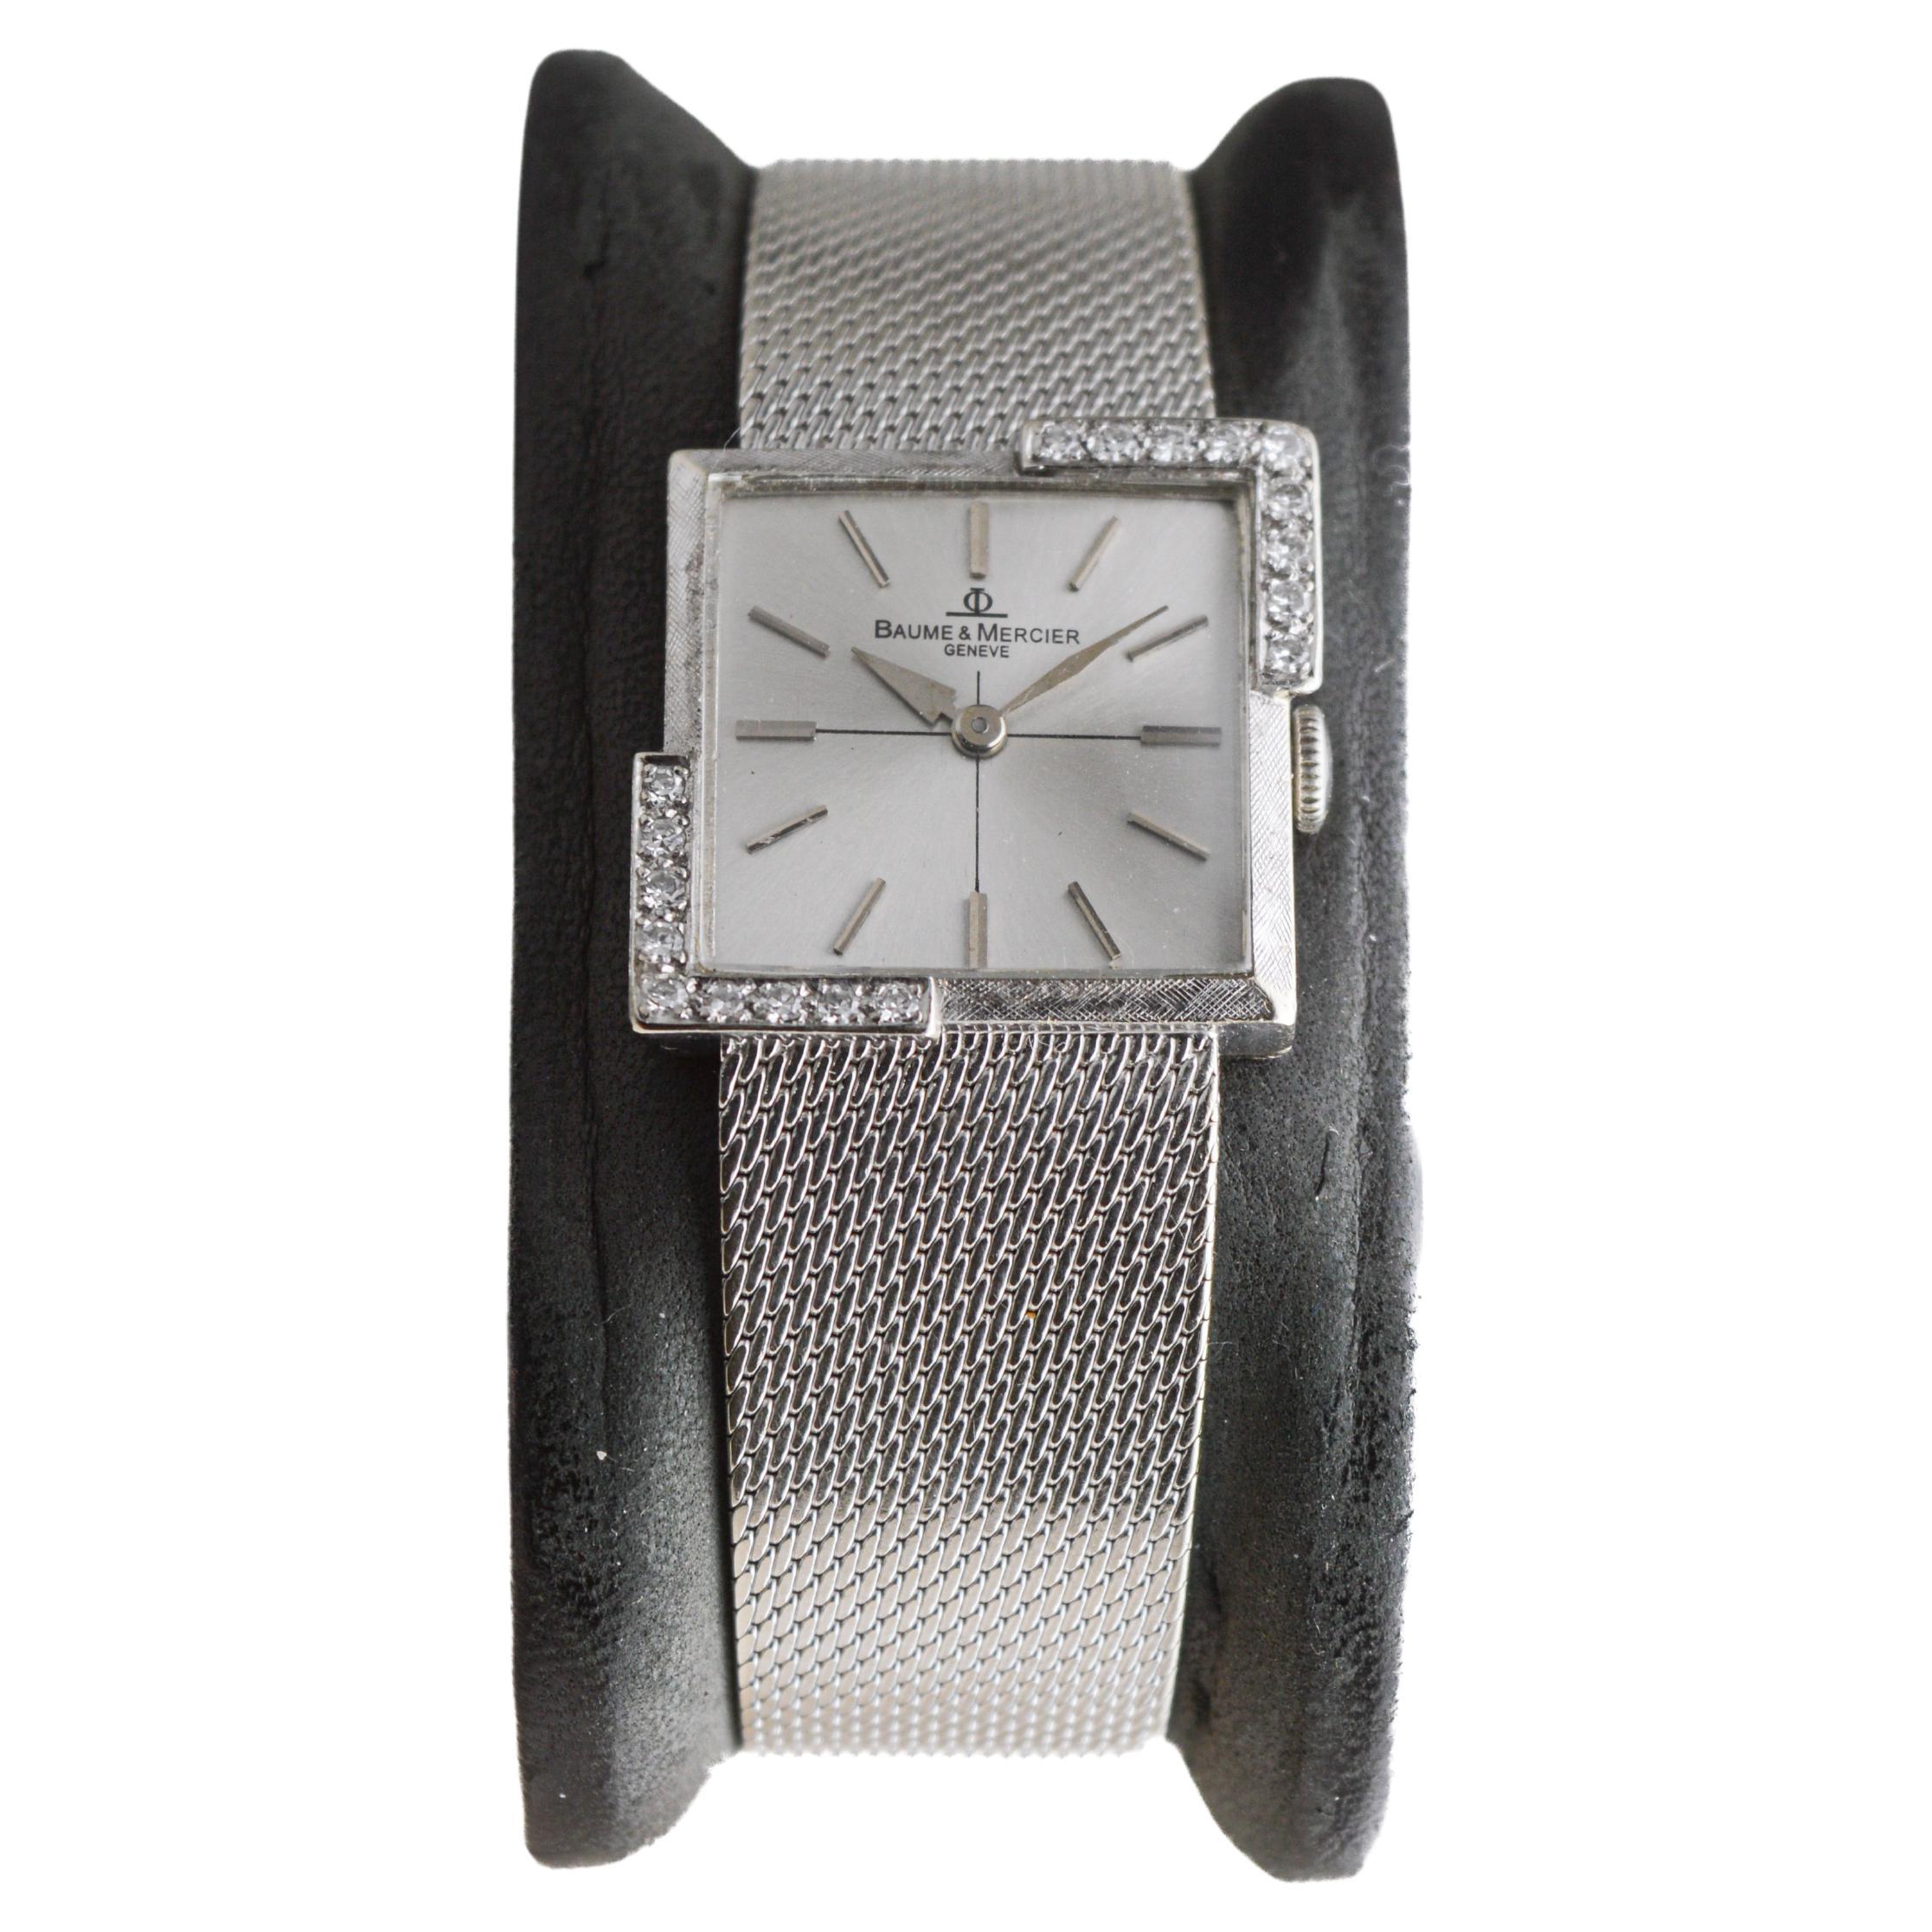 Baume Mercier 14Kt. Solid White Gold Bracelet Watch with In Excellent Condition For Sale In Long Beach, CA